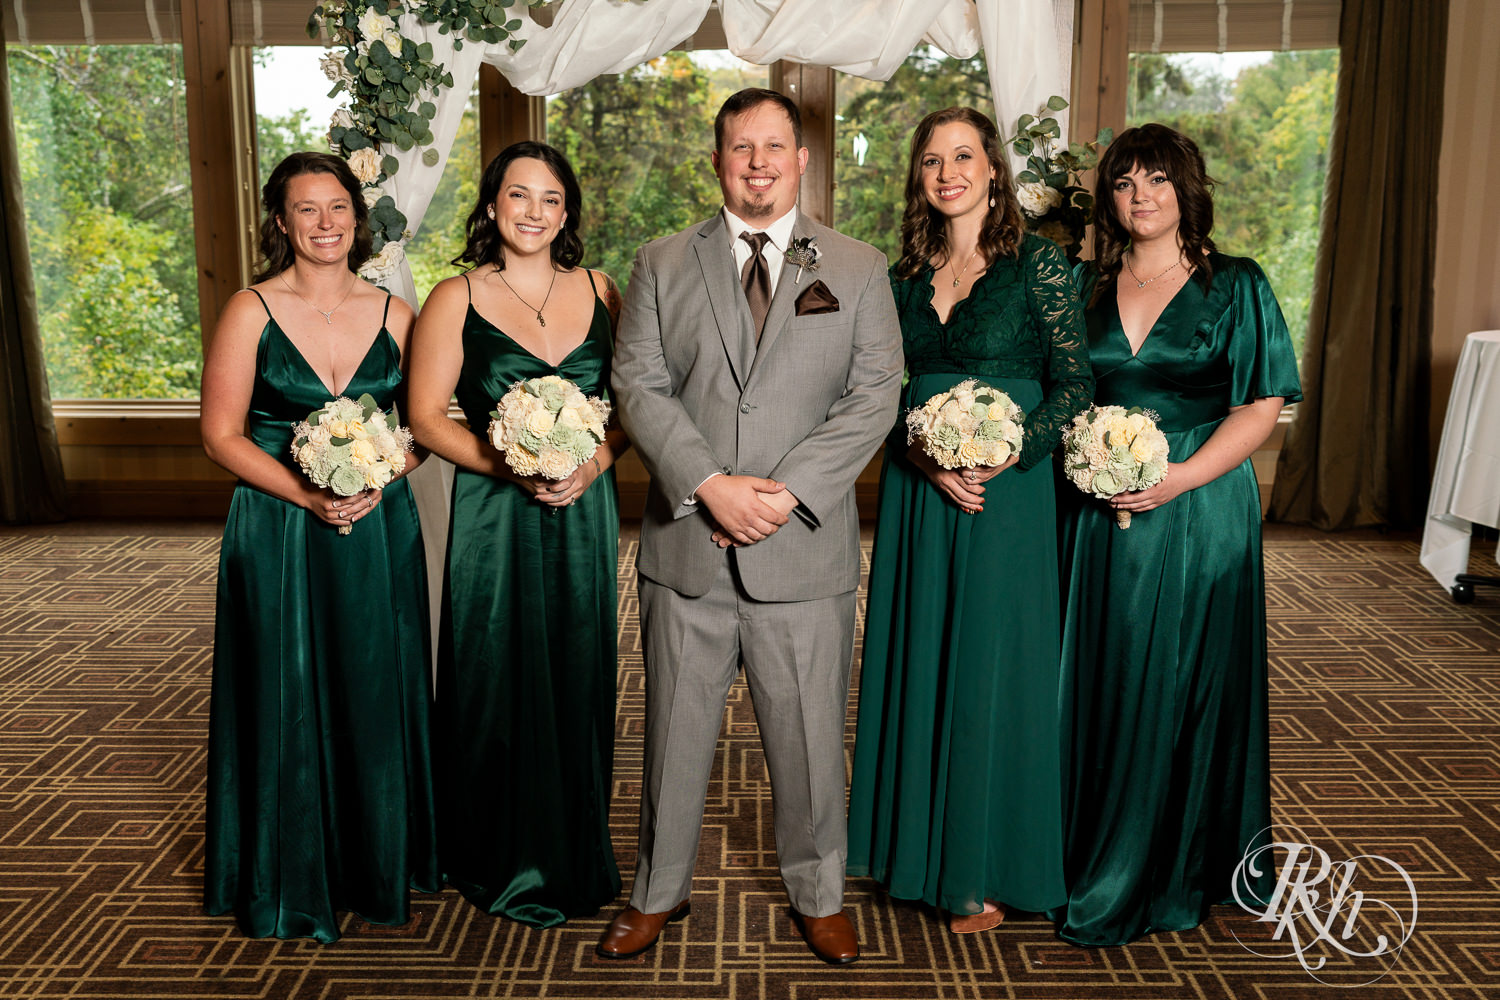 Groom smiles with wedding party at Bunker Hills Event Center in Coon Rapids, Minnesota.